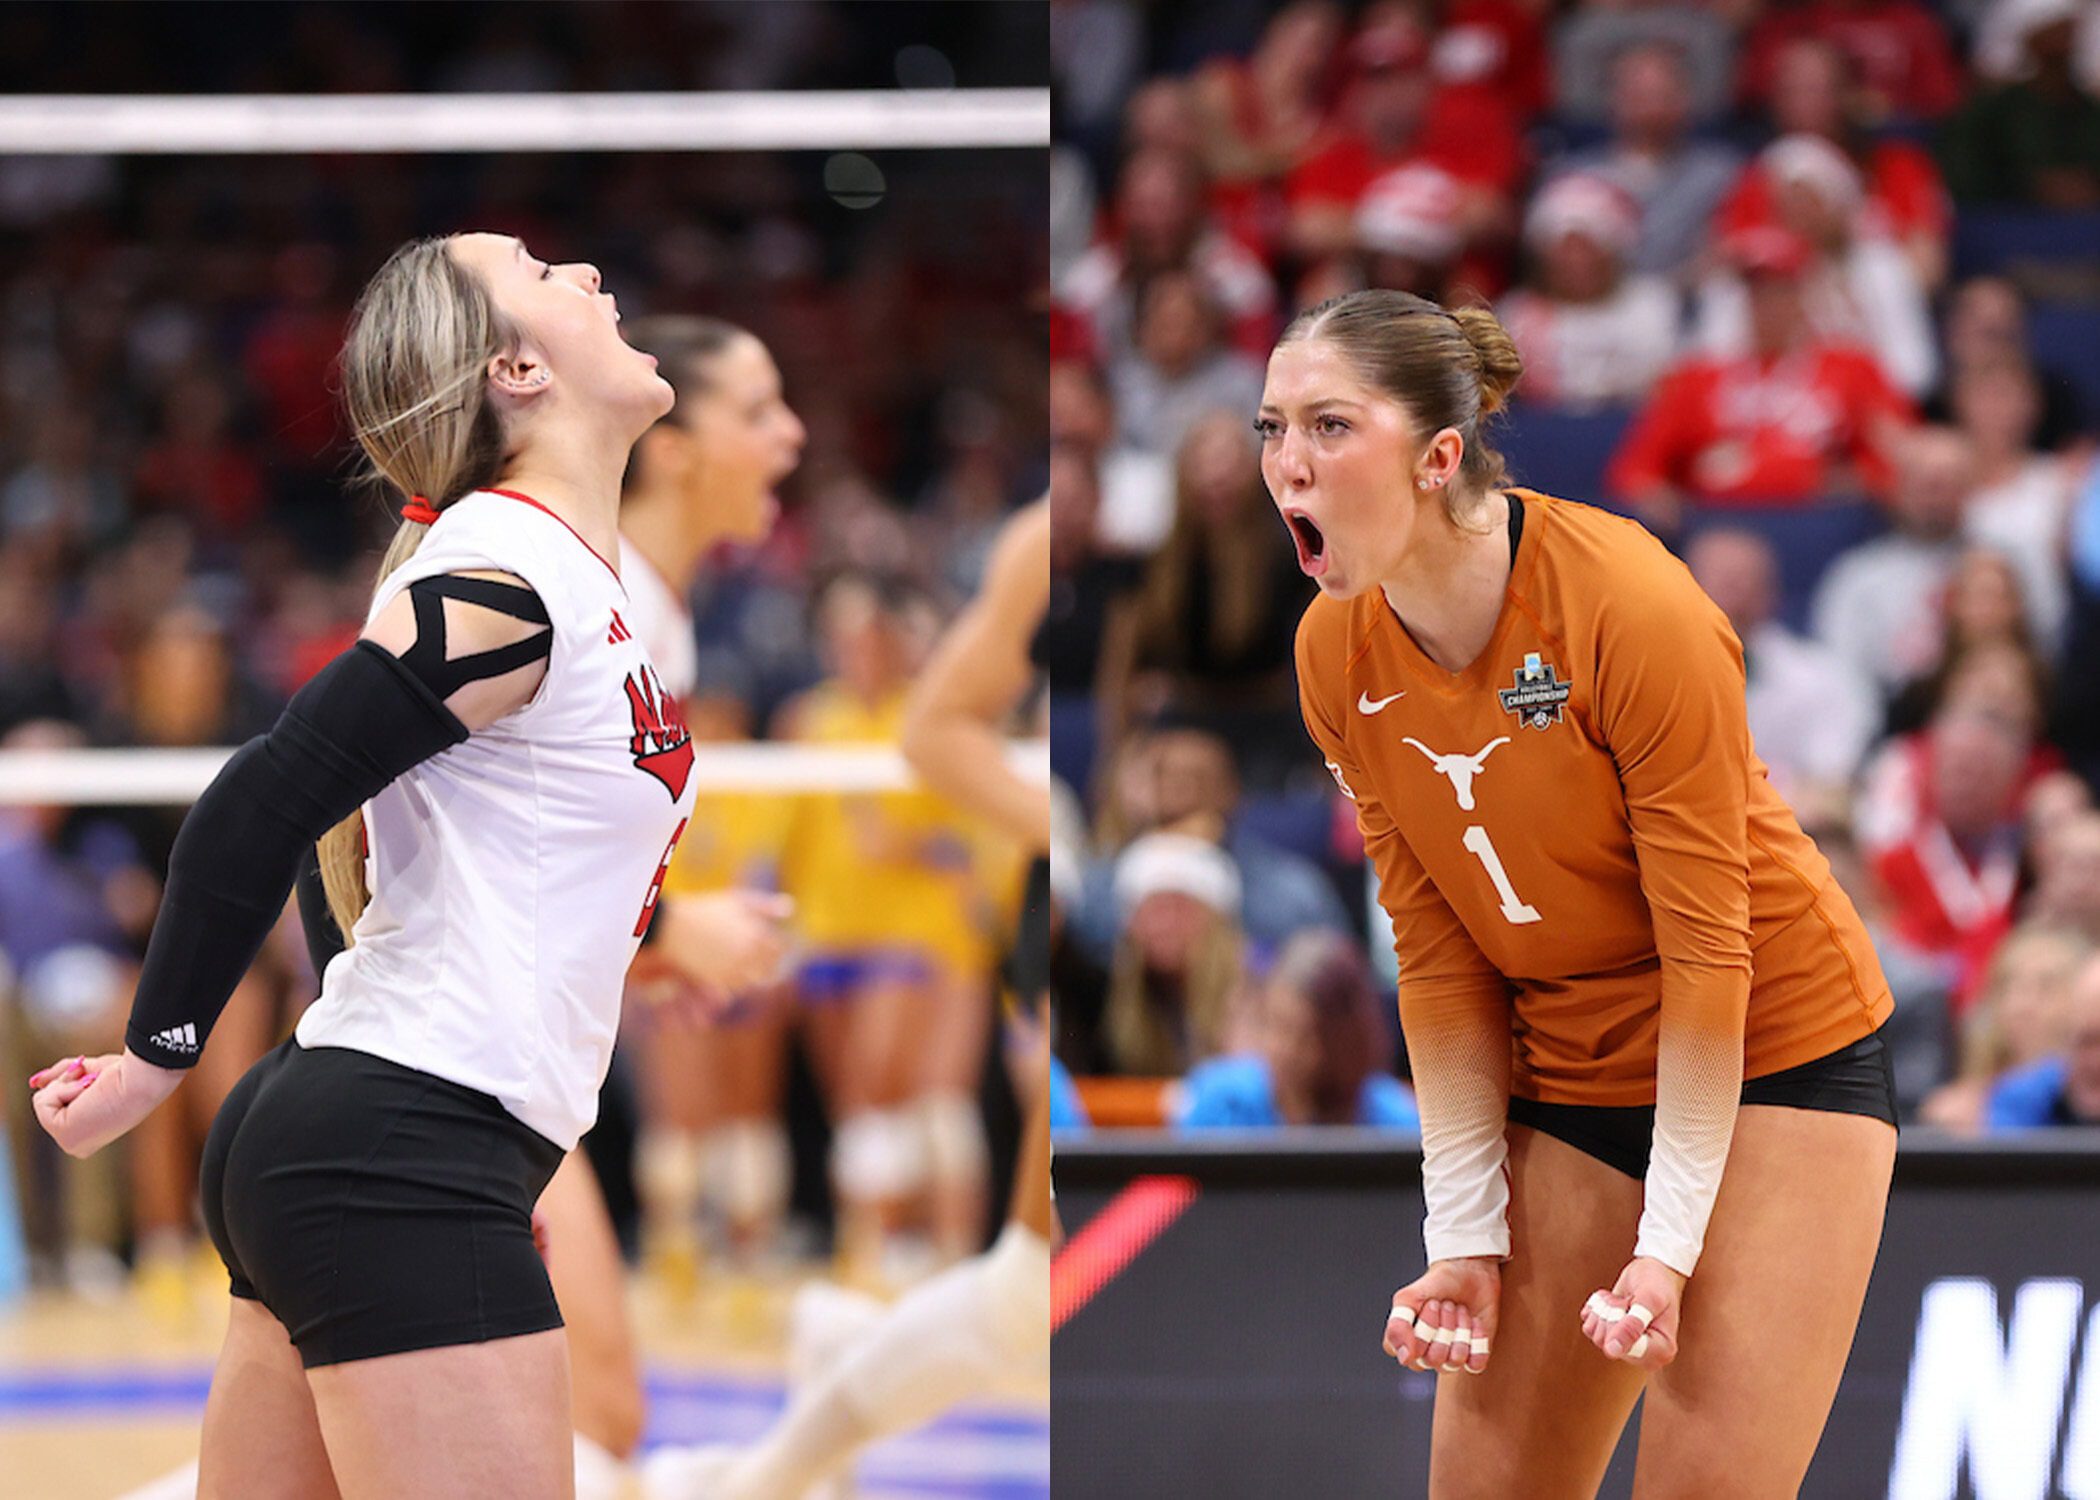 Nebraska vs. Texas volleyball: Time, TV channel, preview for the 2023 national championship